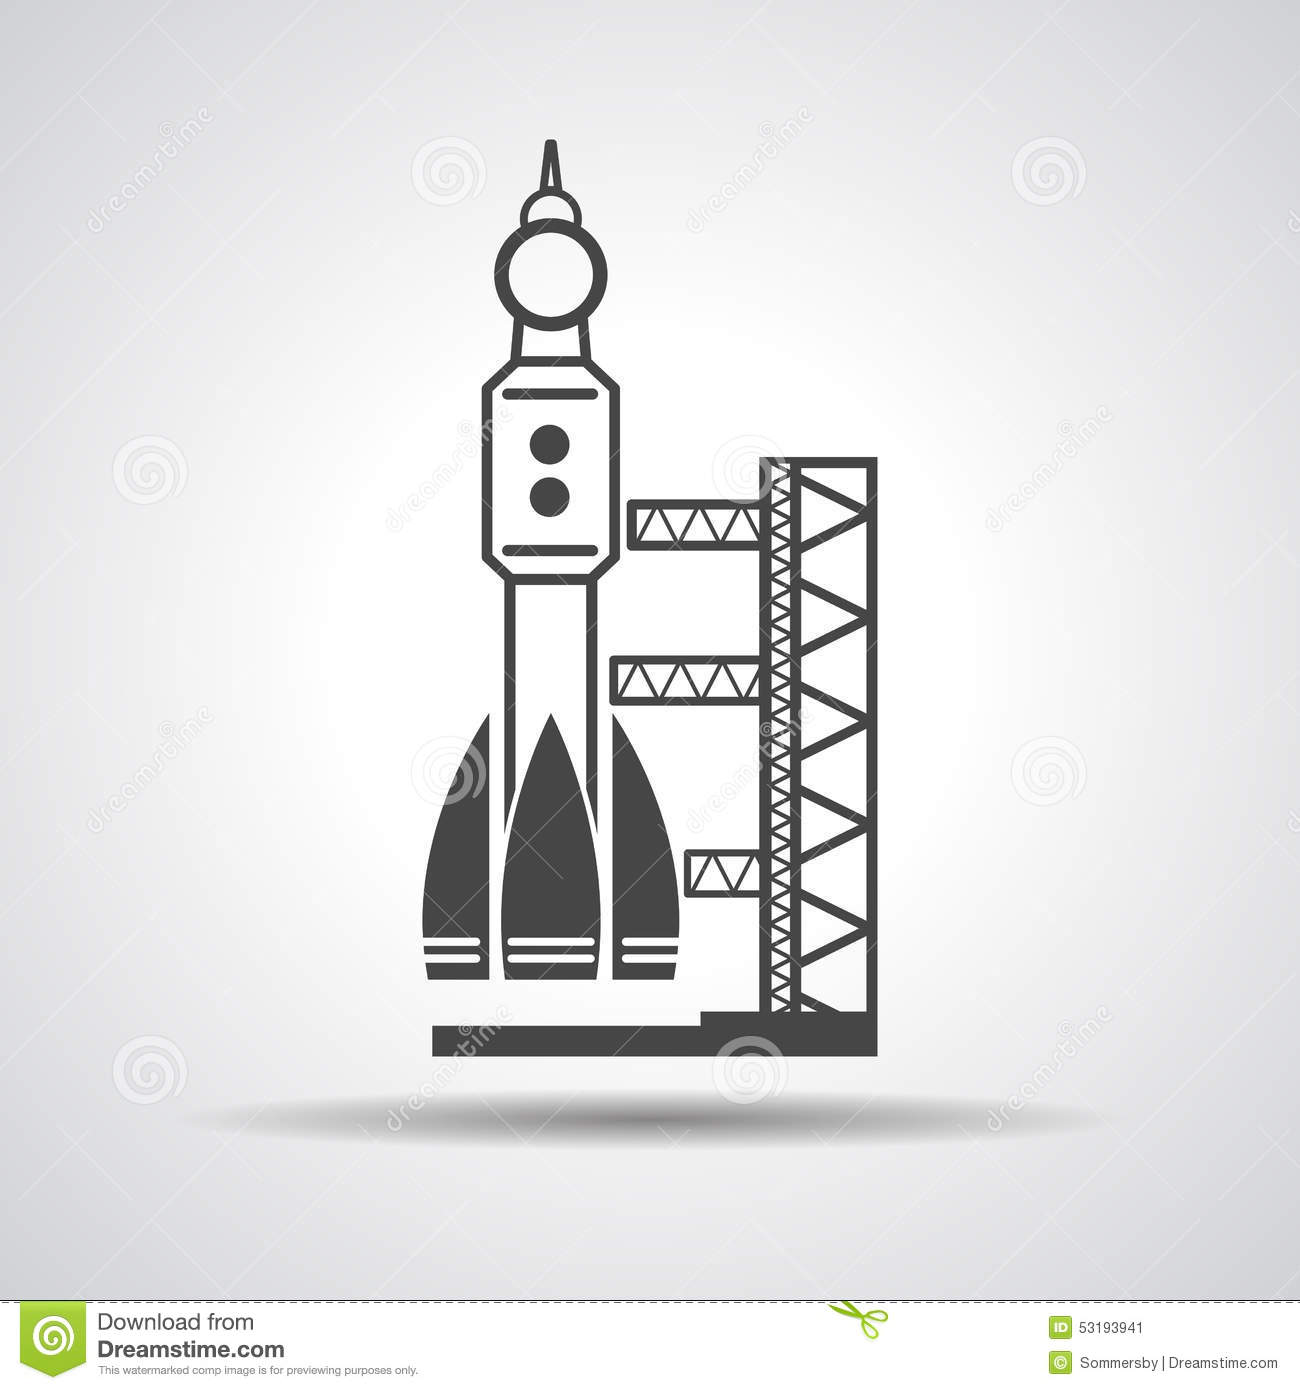 Black Launch Site With Rocket, Spaceport Icon Stock Vector.